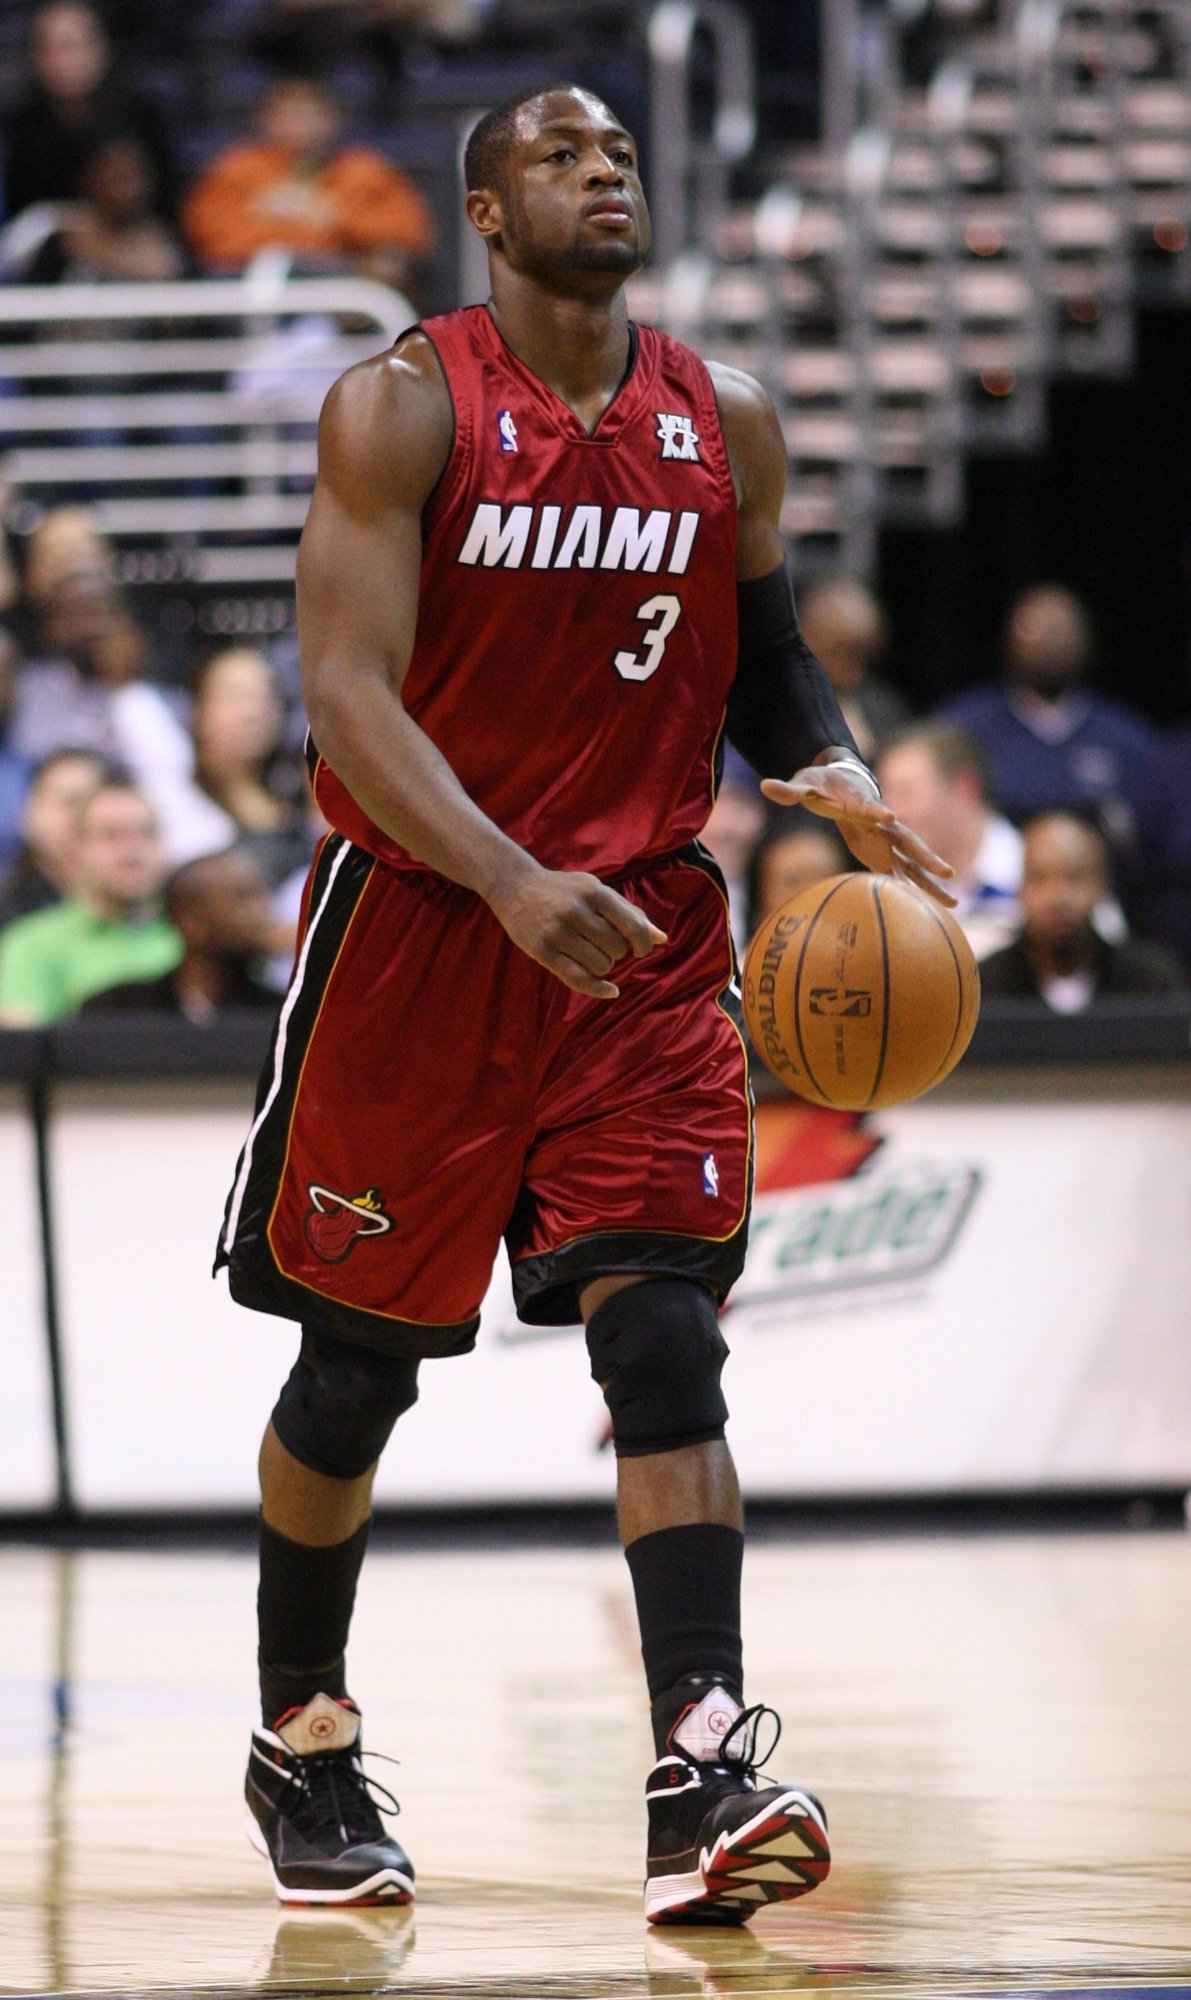 Miami Heat superstar Dwyane Wade is set to retire at the conclusion of the 2018-19 NBA season. Photo courtesy of Wikimedia Commons/Keith Allison.